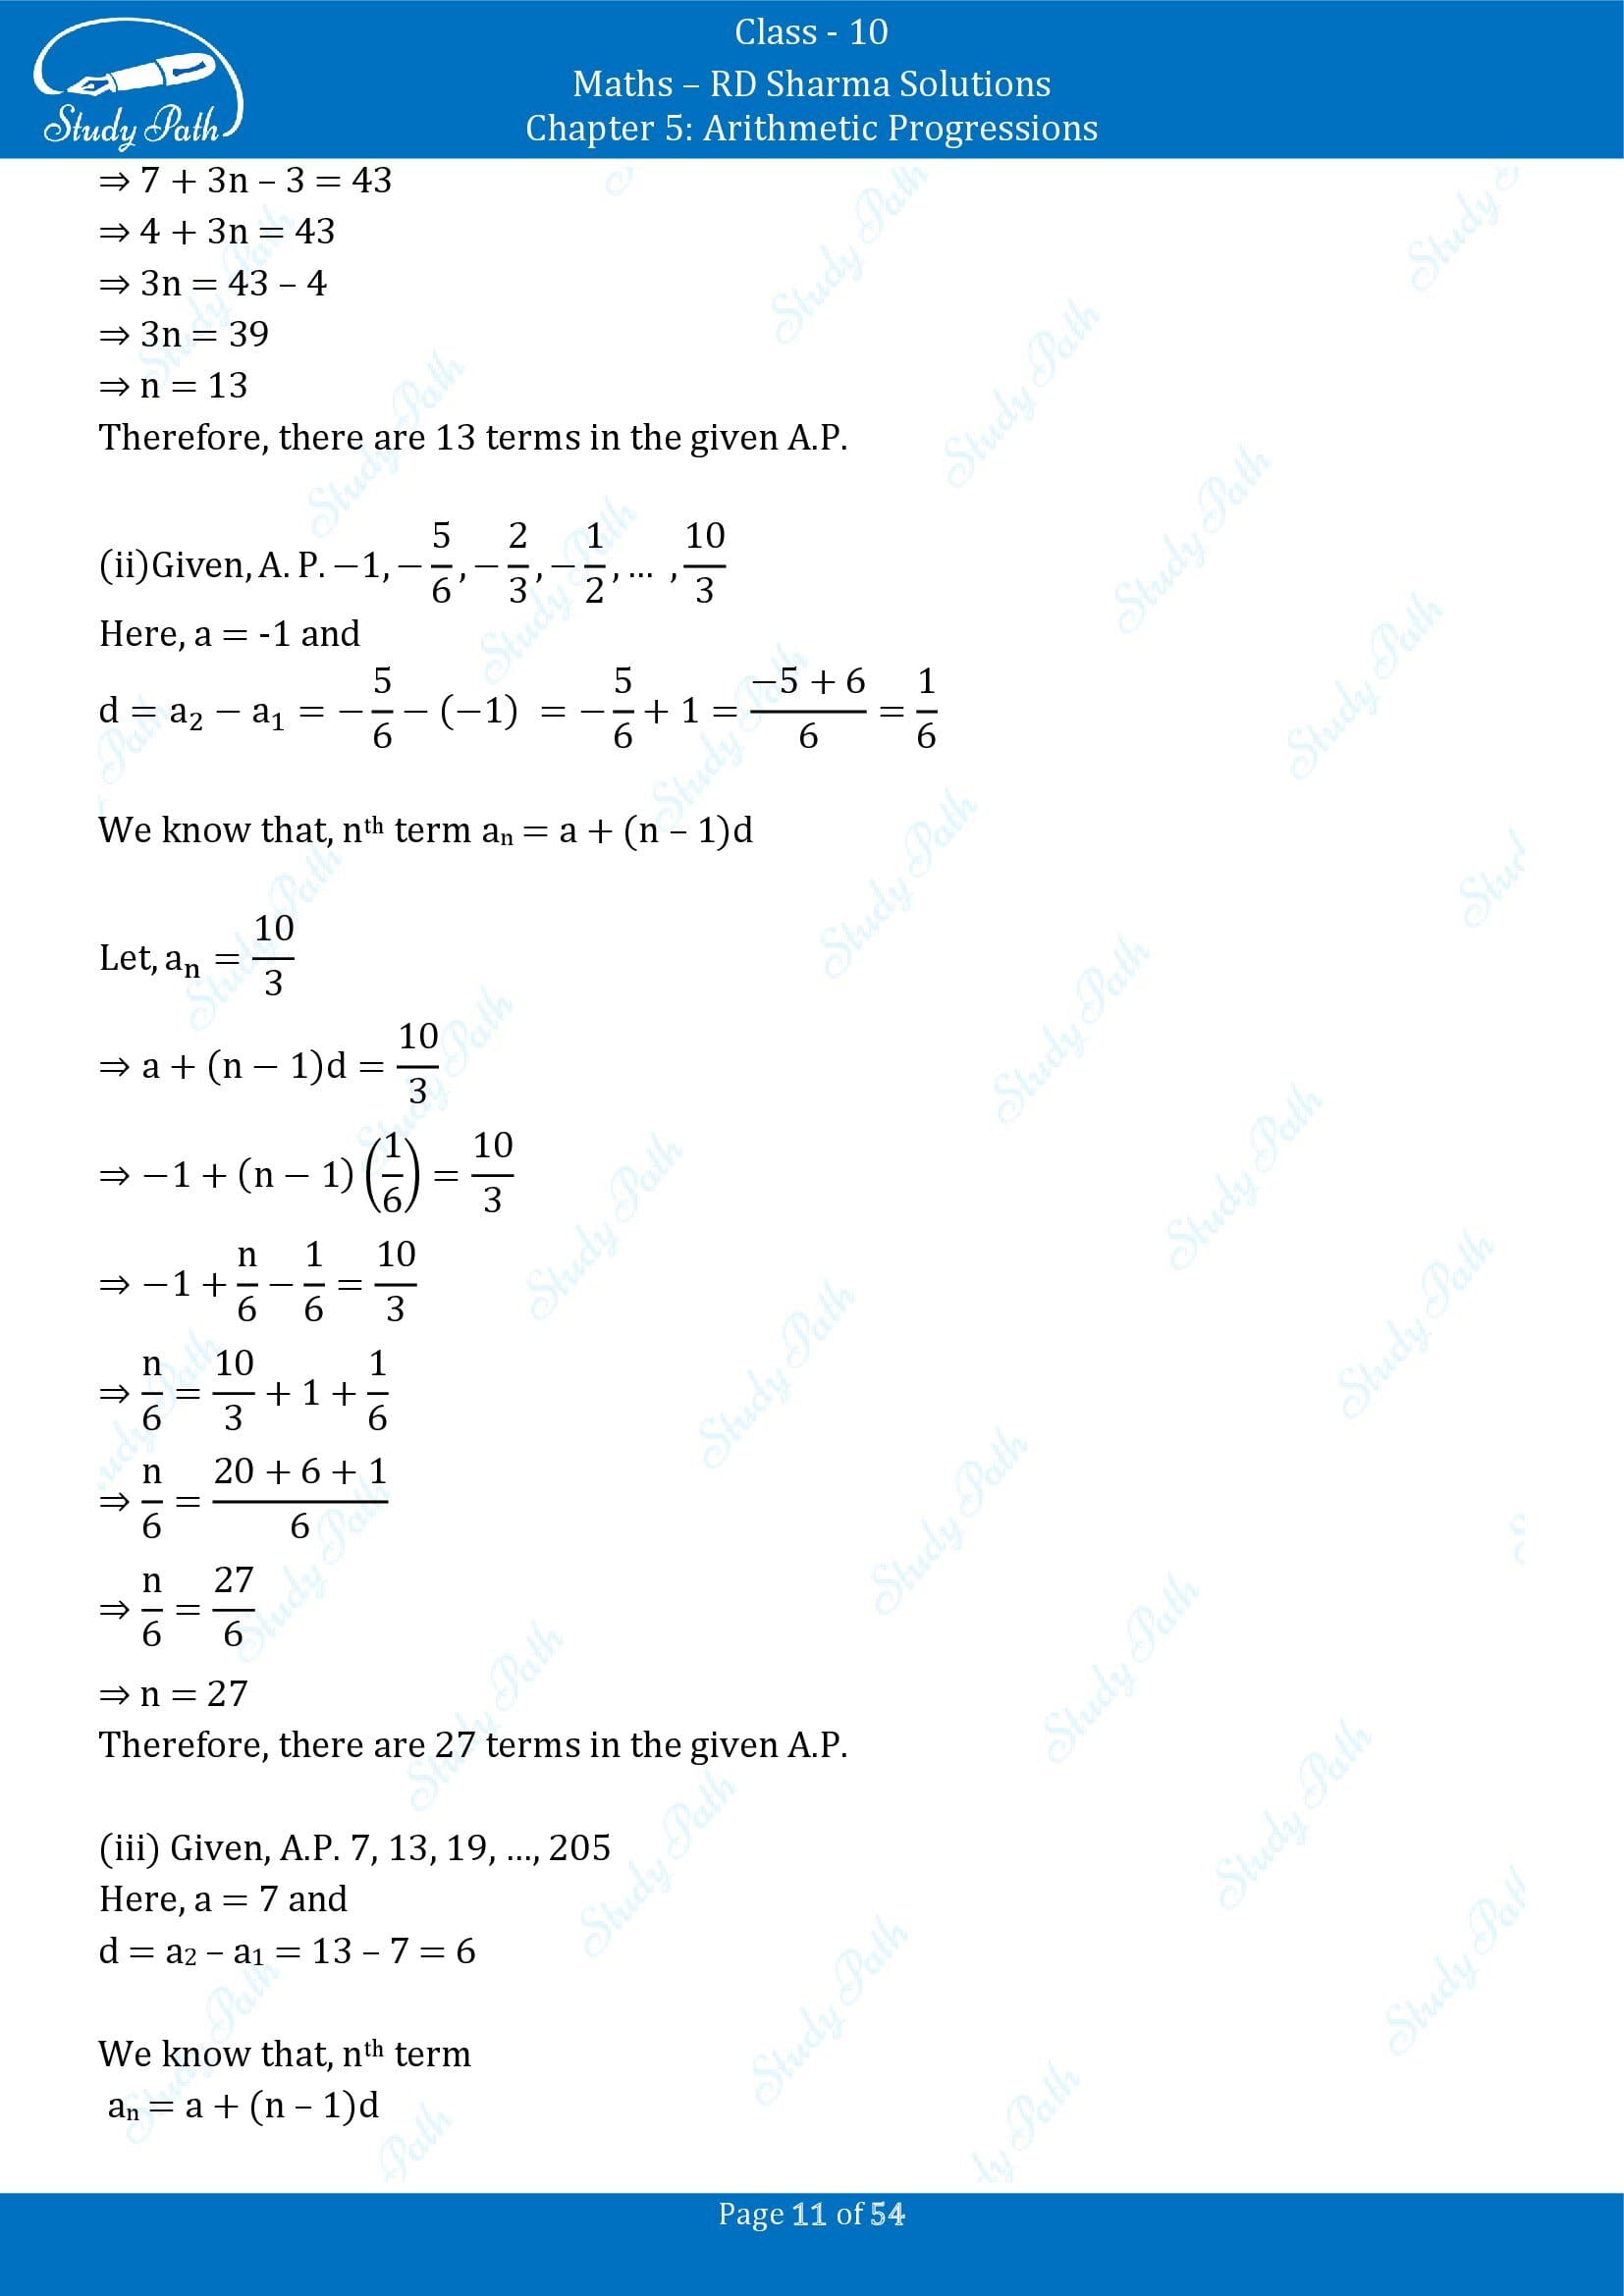 RD Sharma Solutions Class 10 Chapter 5 Arithmetic Progressions Exercise 5.4 00011